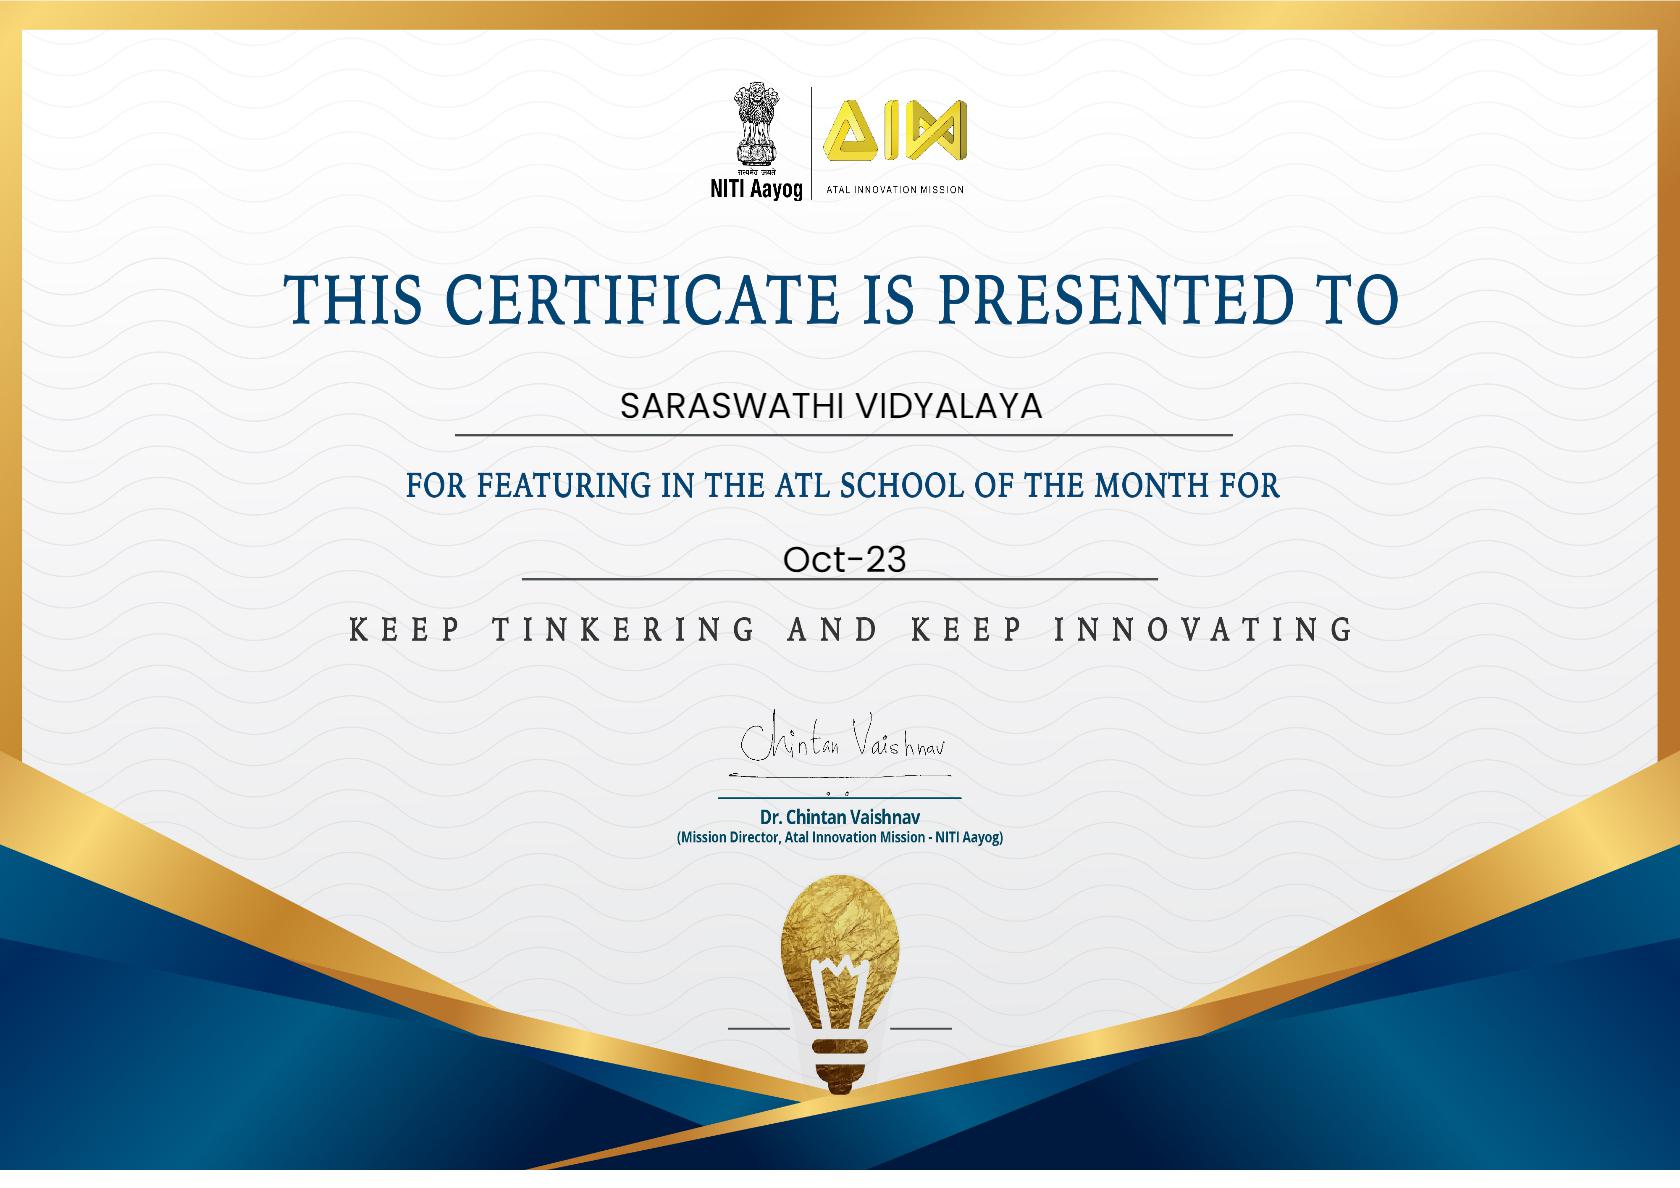 Saraswathi Vidyalaya Basks In The Glory Of  Being Selected As The ATL School Of The Month By Atal Innovation Mission (AIM)